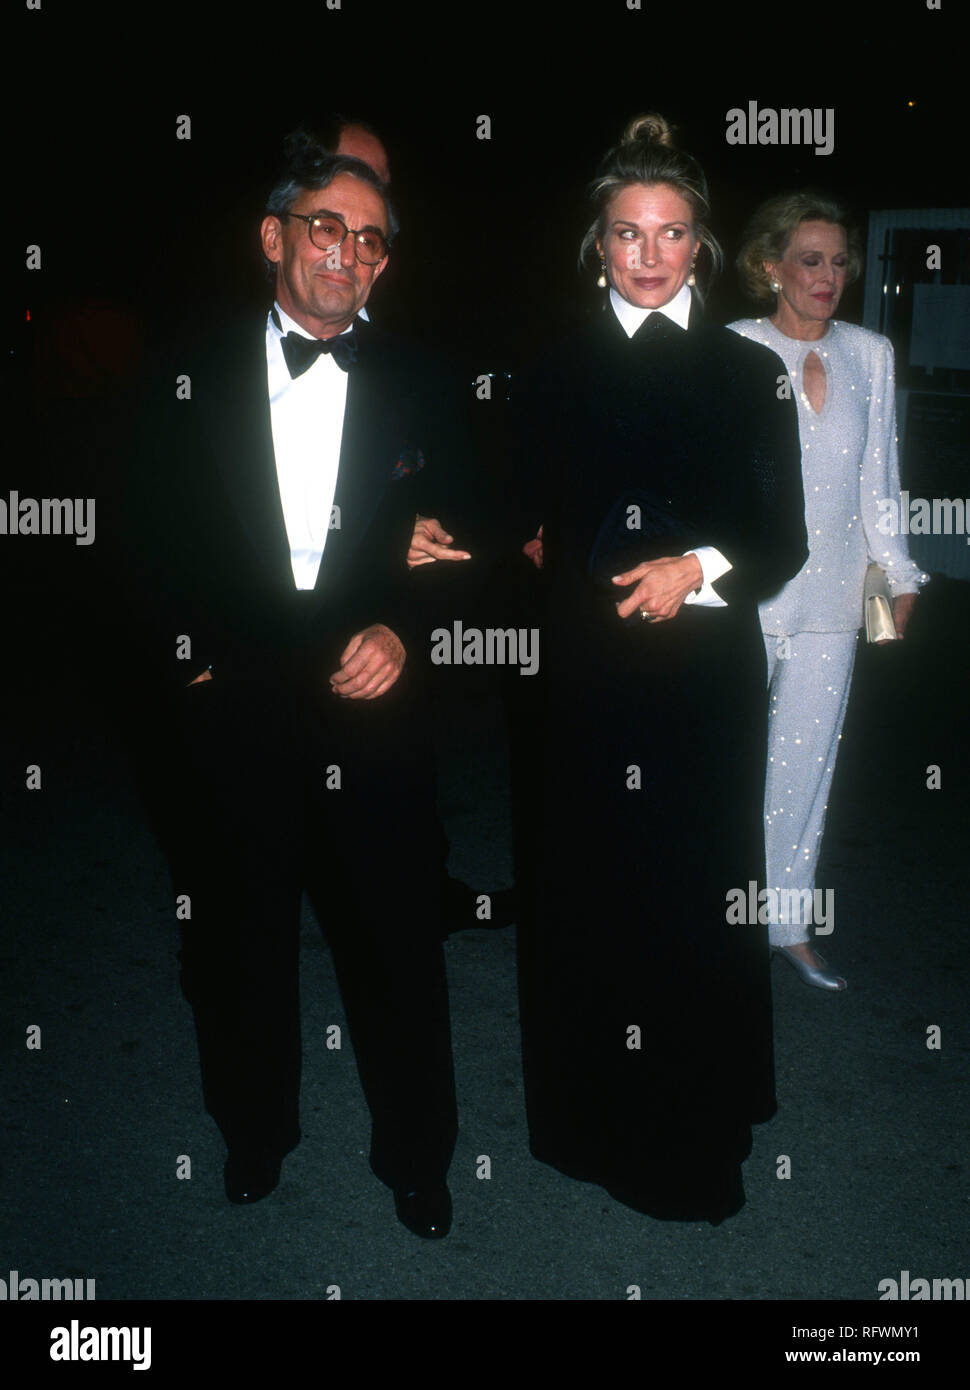 HOLLYWOOD, CA - NOVEMBER 13: Director Louis Malle, and wife actress Candice Bergen attend the Hollywood Entertainment Museum's Fifth Annual Legacy Awards on November 13, 1993 at the Hollywood Palladium in Hollywood, California. Photo by Barry King/Alamy Stock Photo Stock Photo